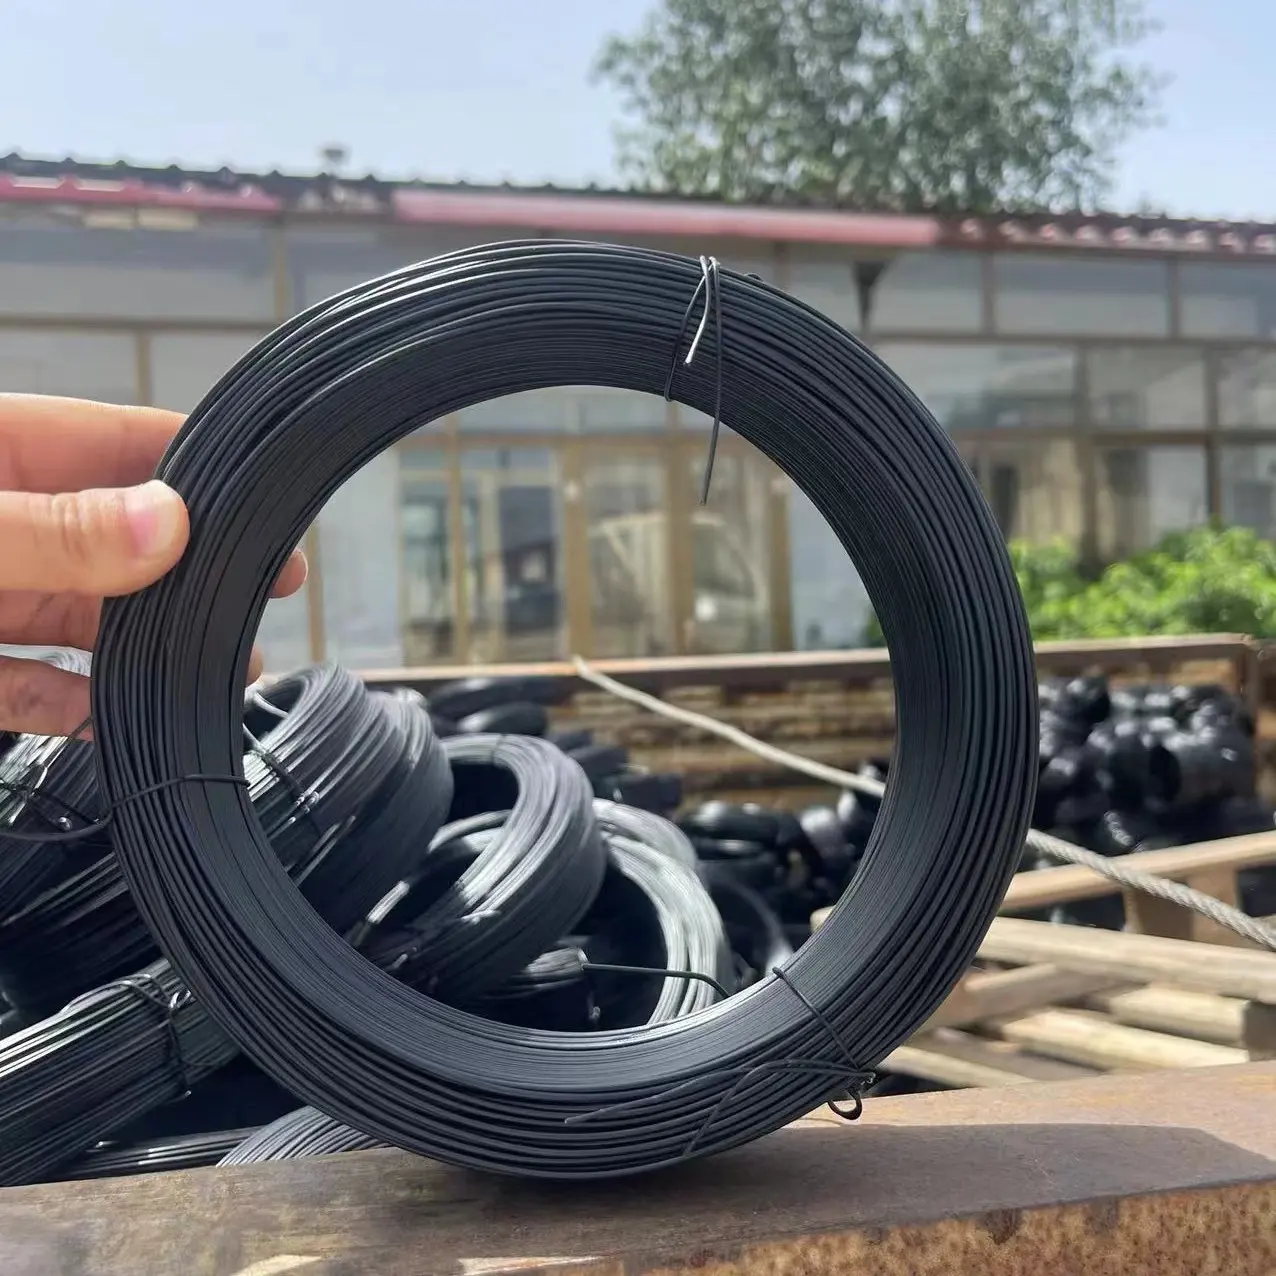 Hot sale Building Binding wire black iron wire 1.2mm 18# 1kg per roll Black annealed wire